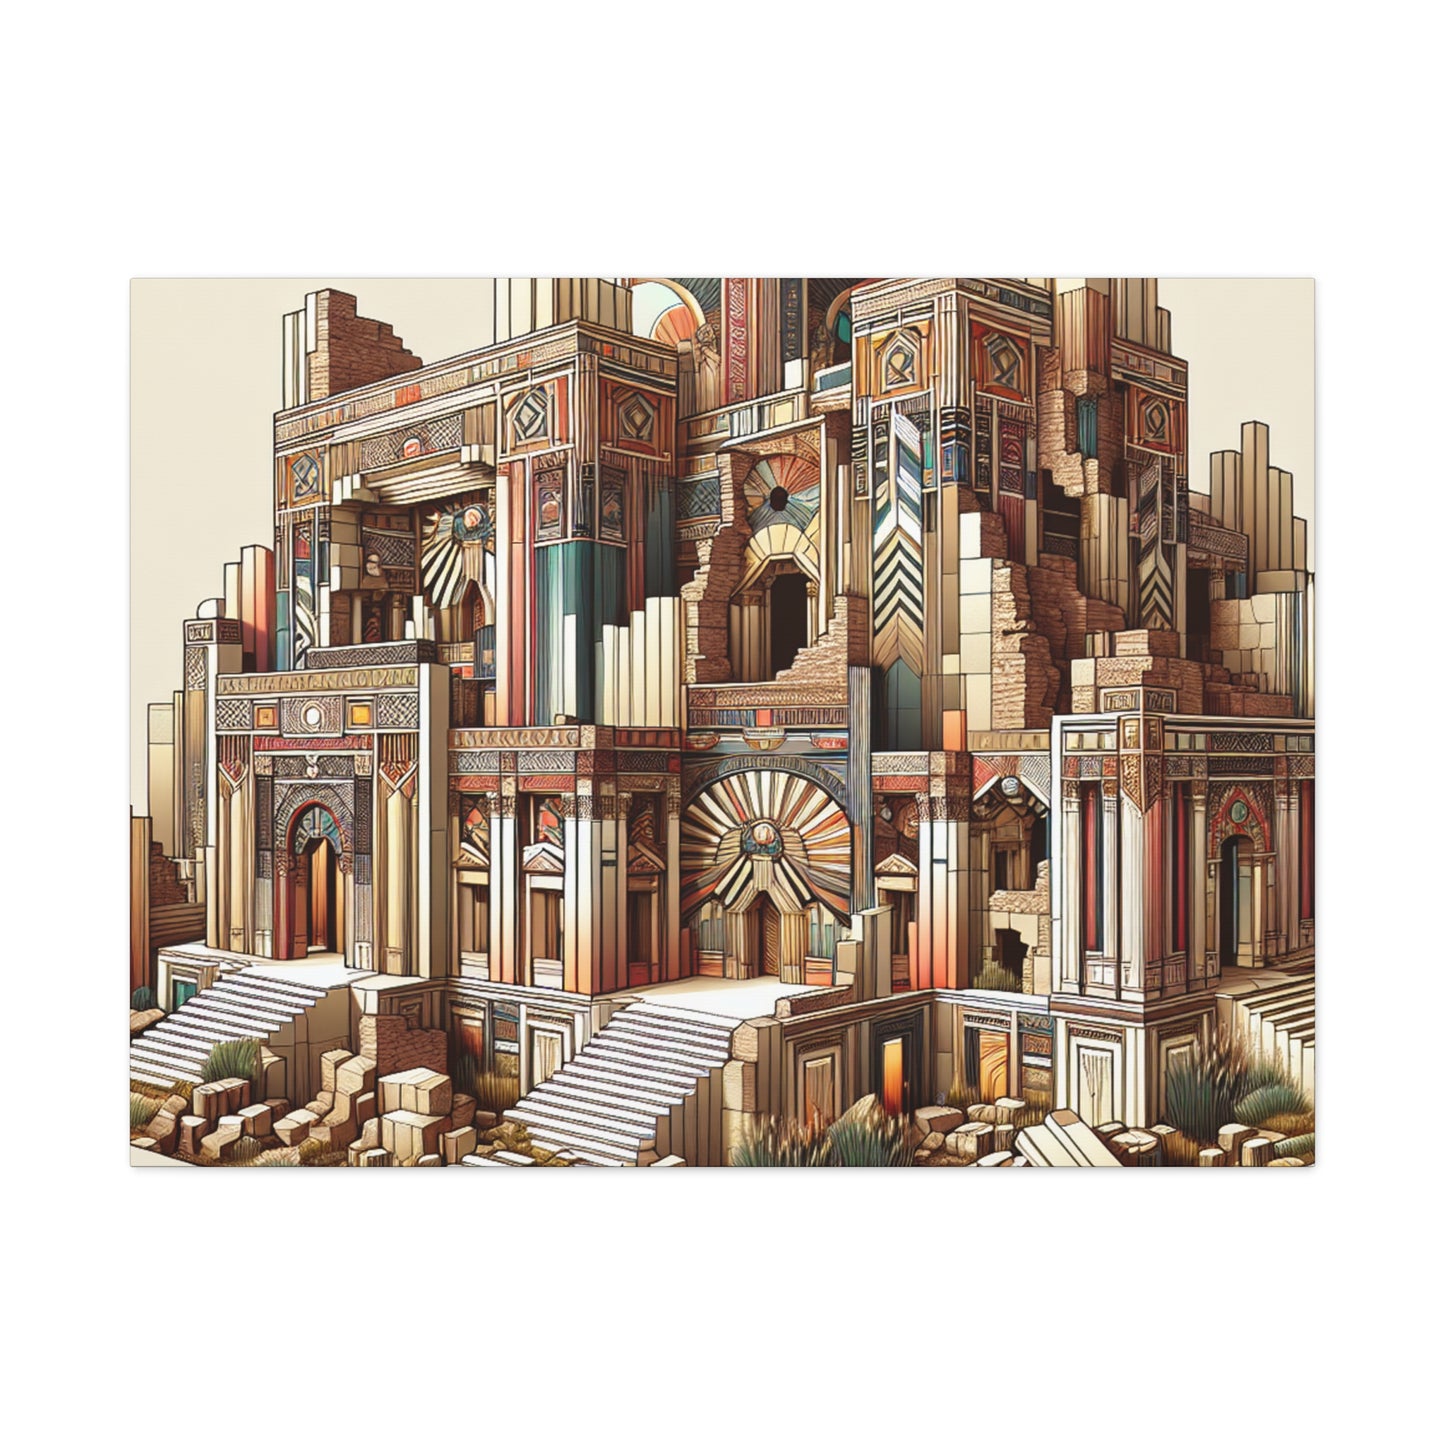 "Deco Ruins: Geometric Art in an Ancient Setting" - The Alien Canva Art Deco Style